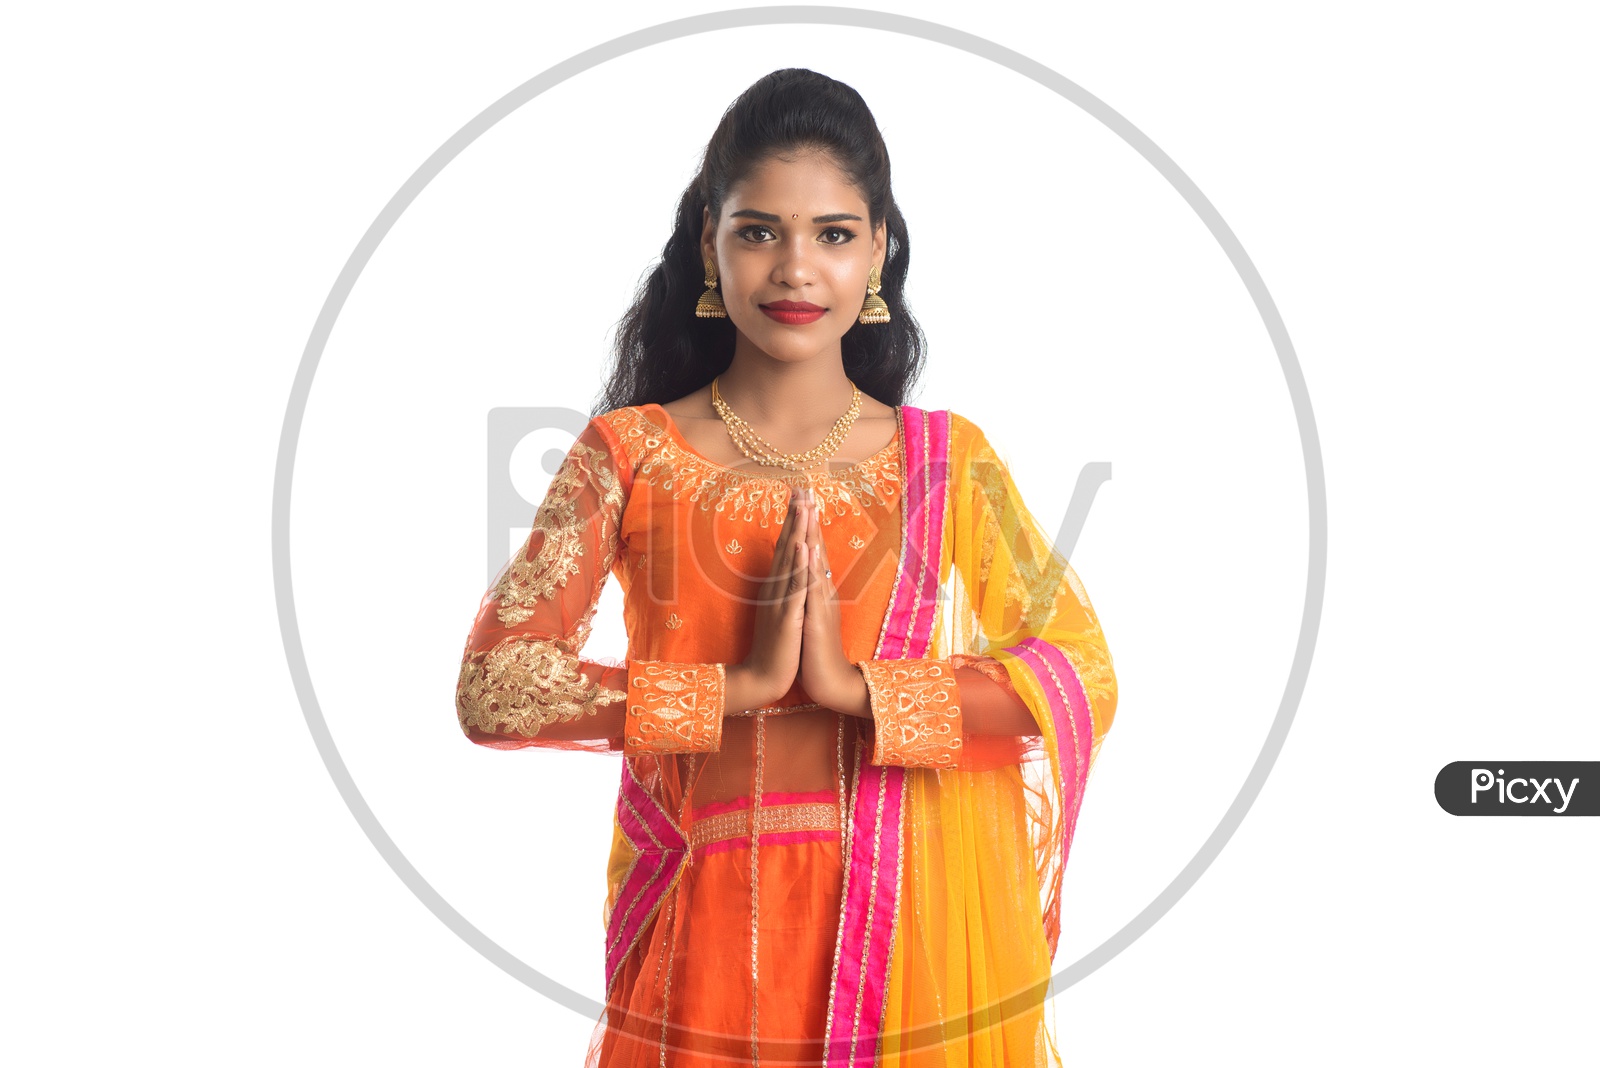 Portrait Of a Young Indian Woman Gesturing Namaste  With a Smiling Face and Posing On an Isolated White Background